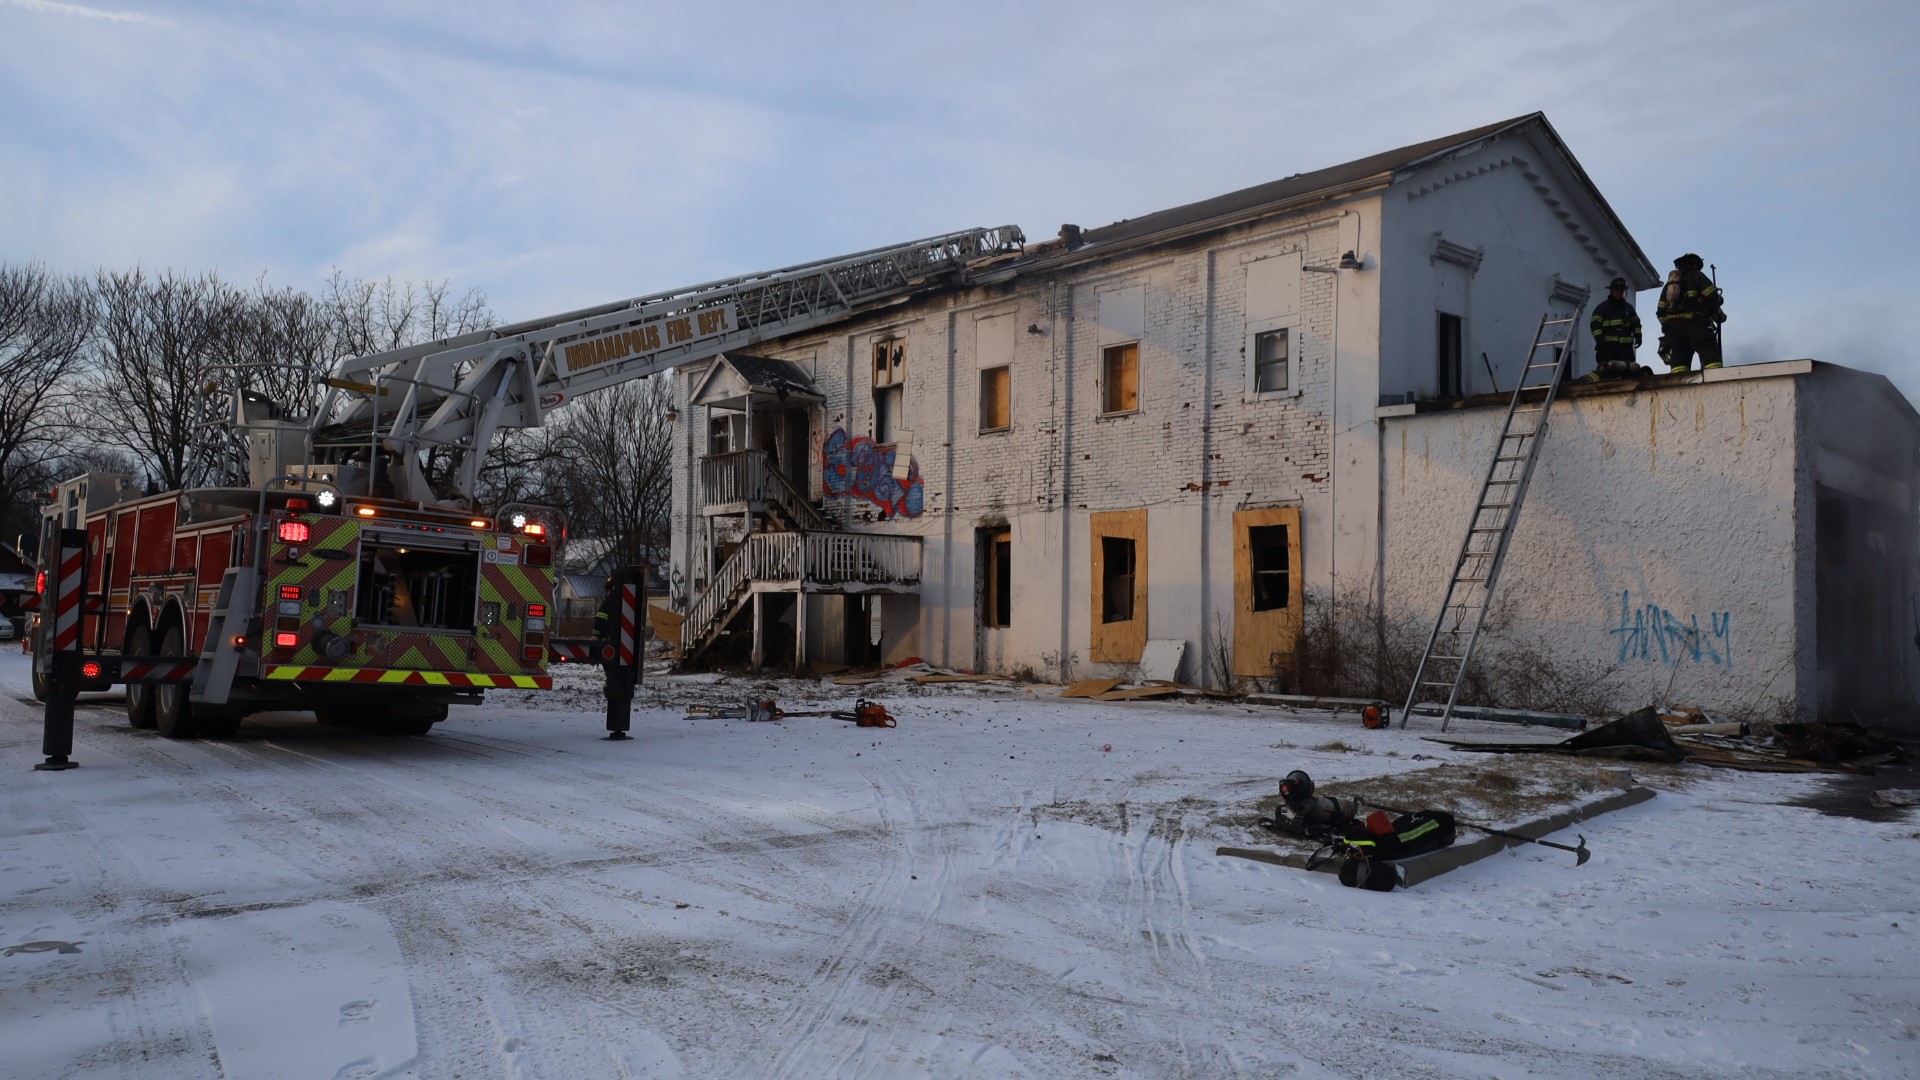 Firefighters found a victim dead inside a burning building Saturday morning.